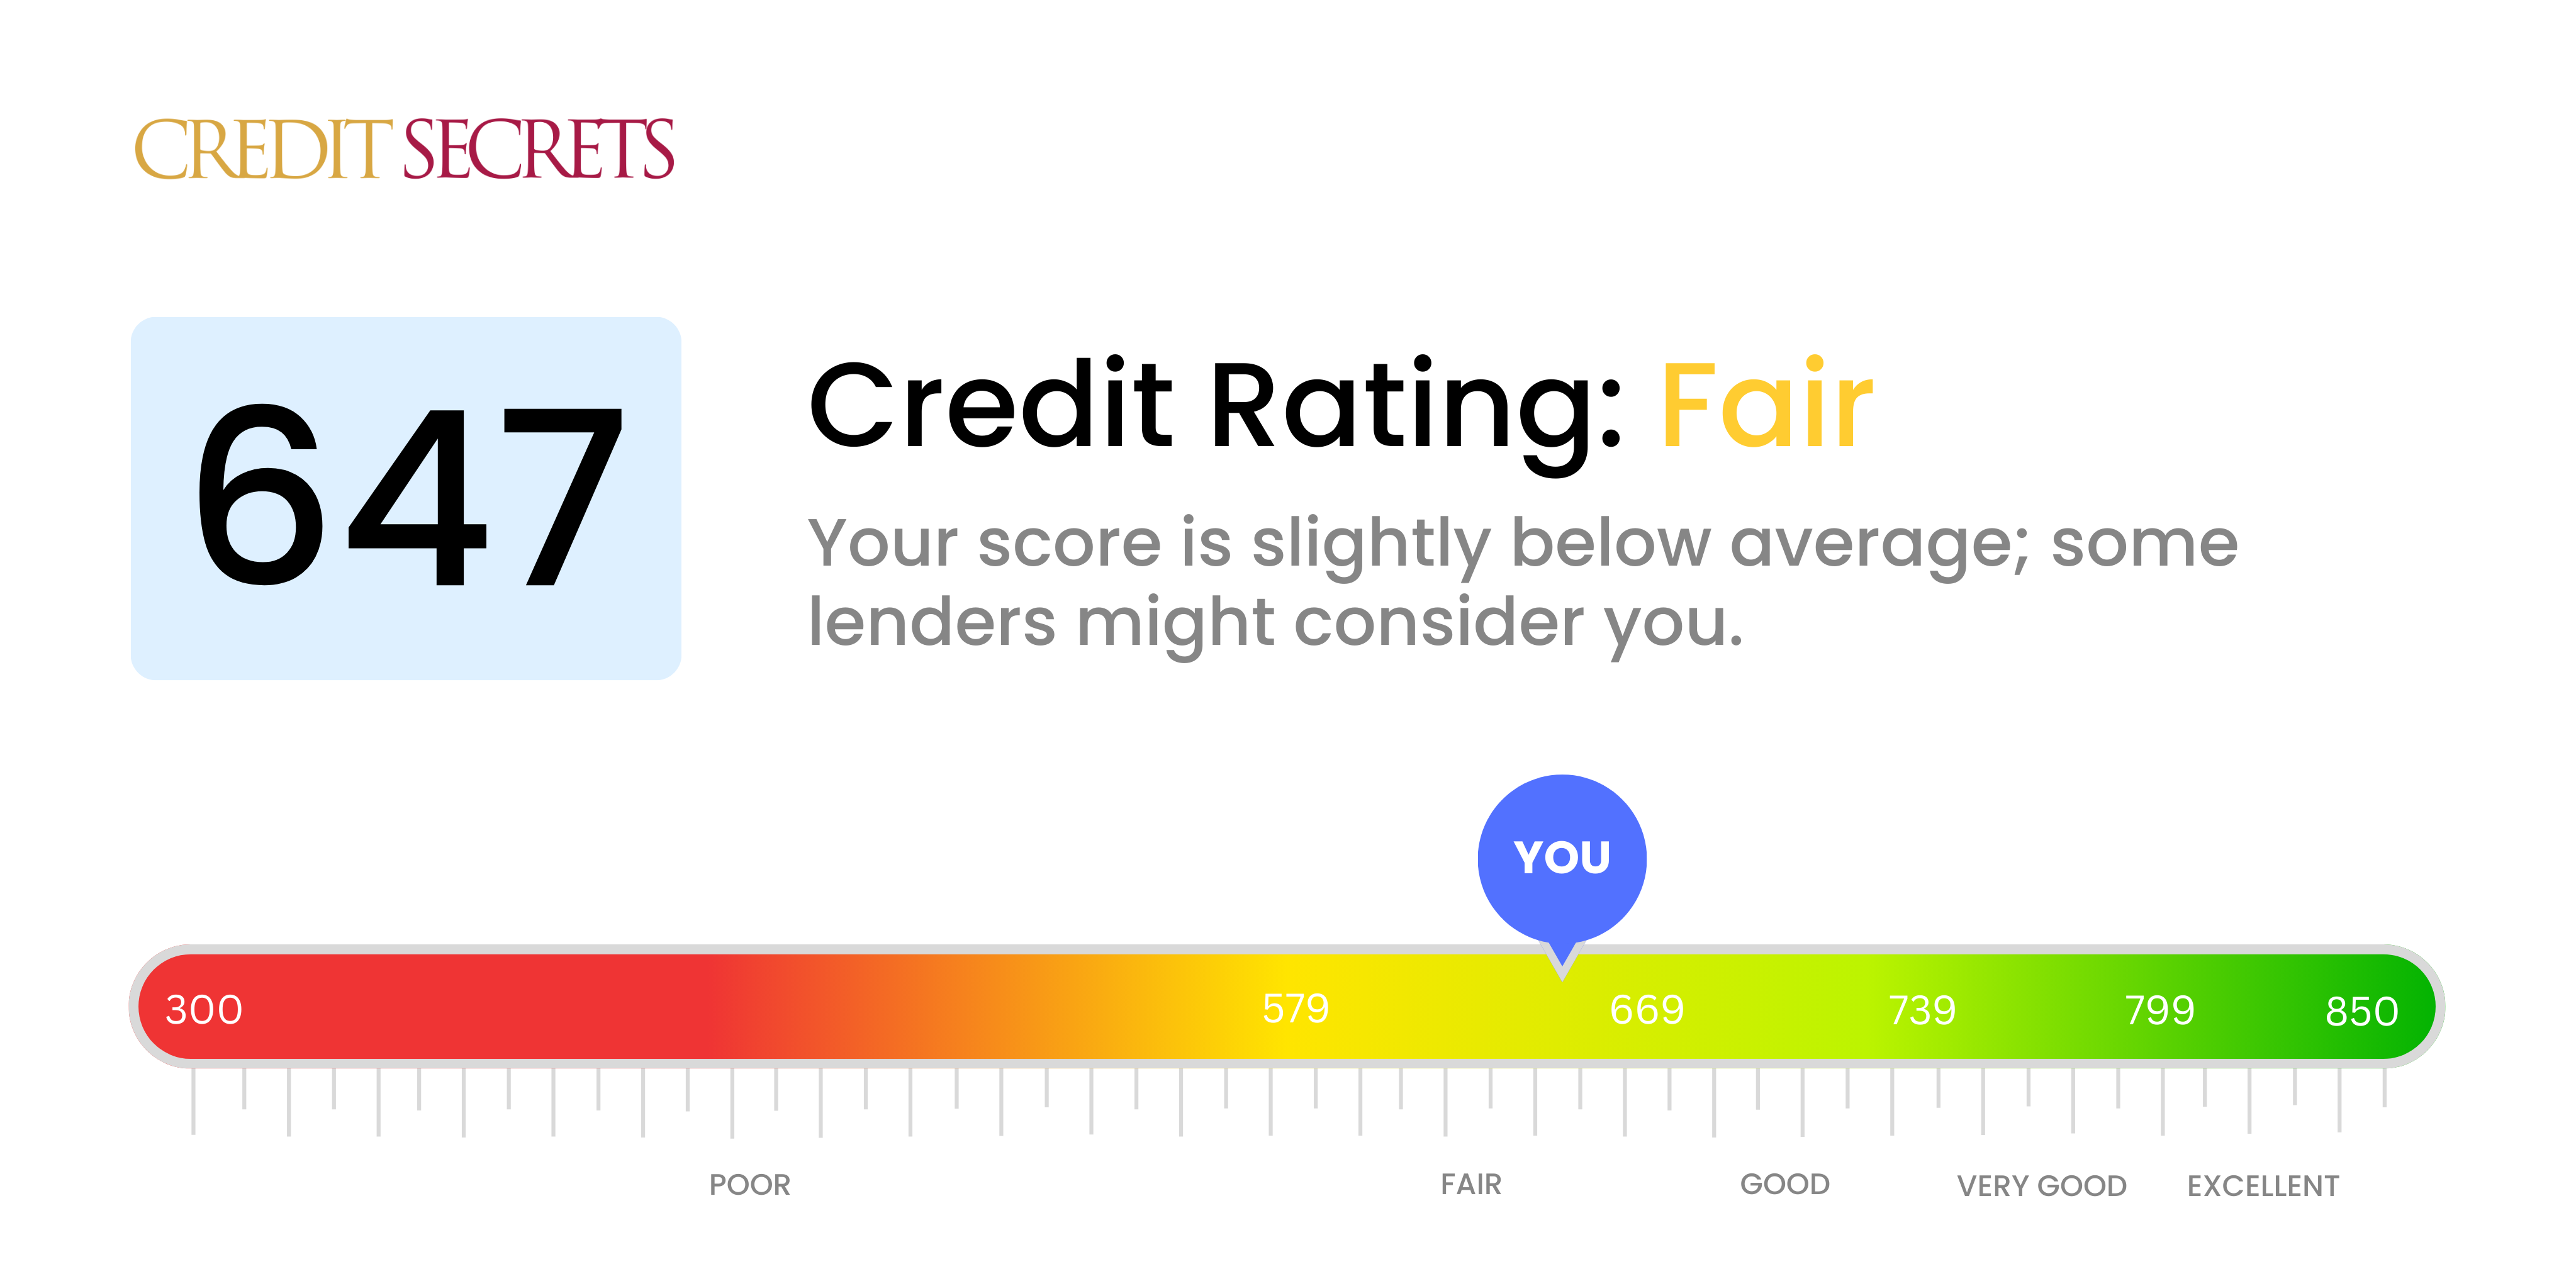 Is 647 a good credit score?